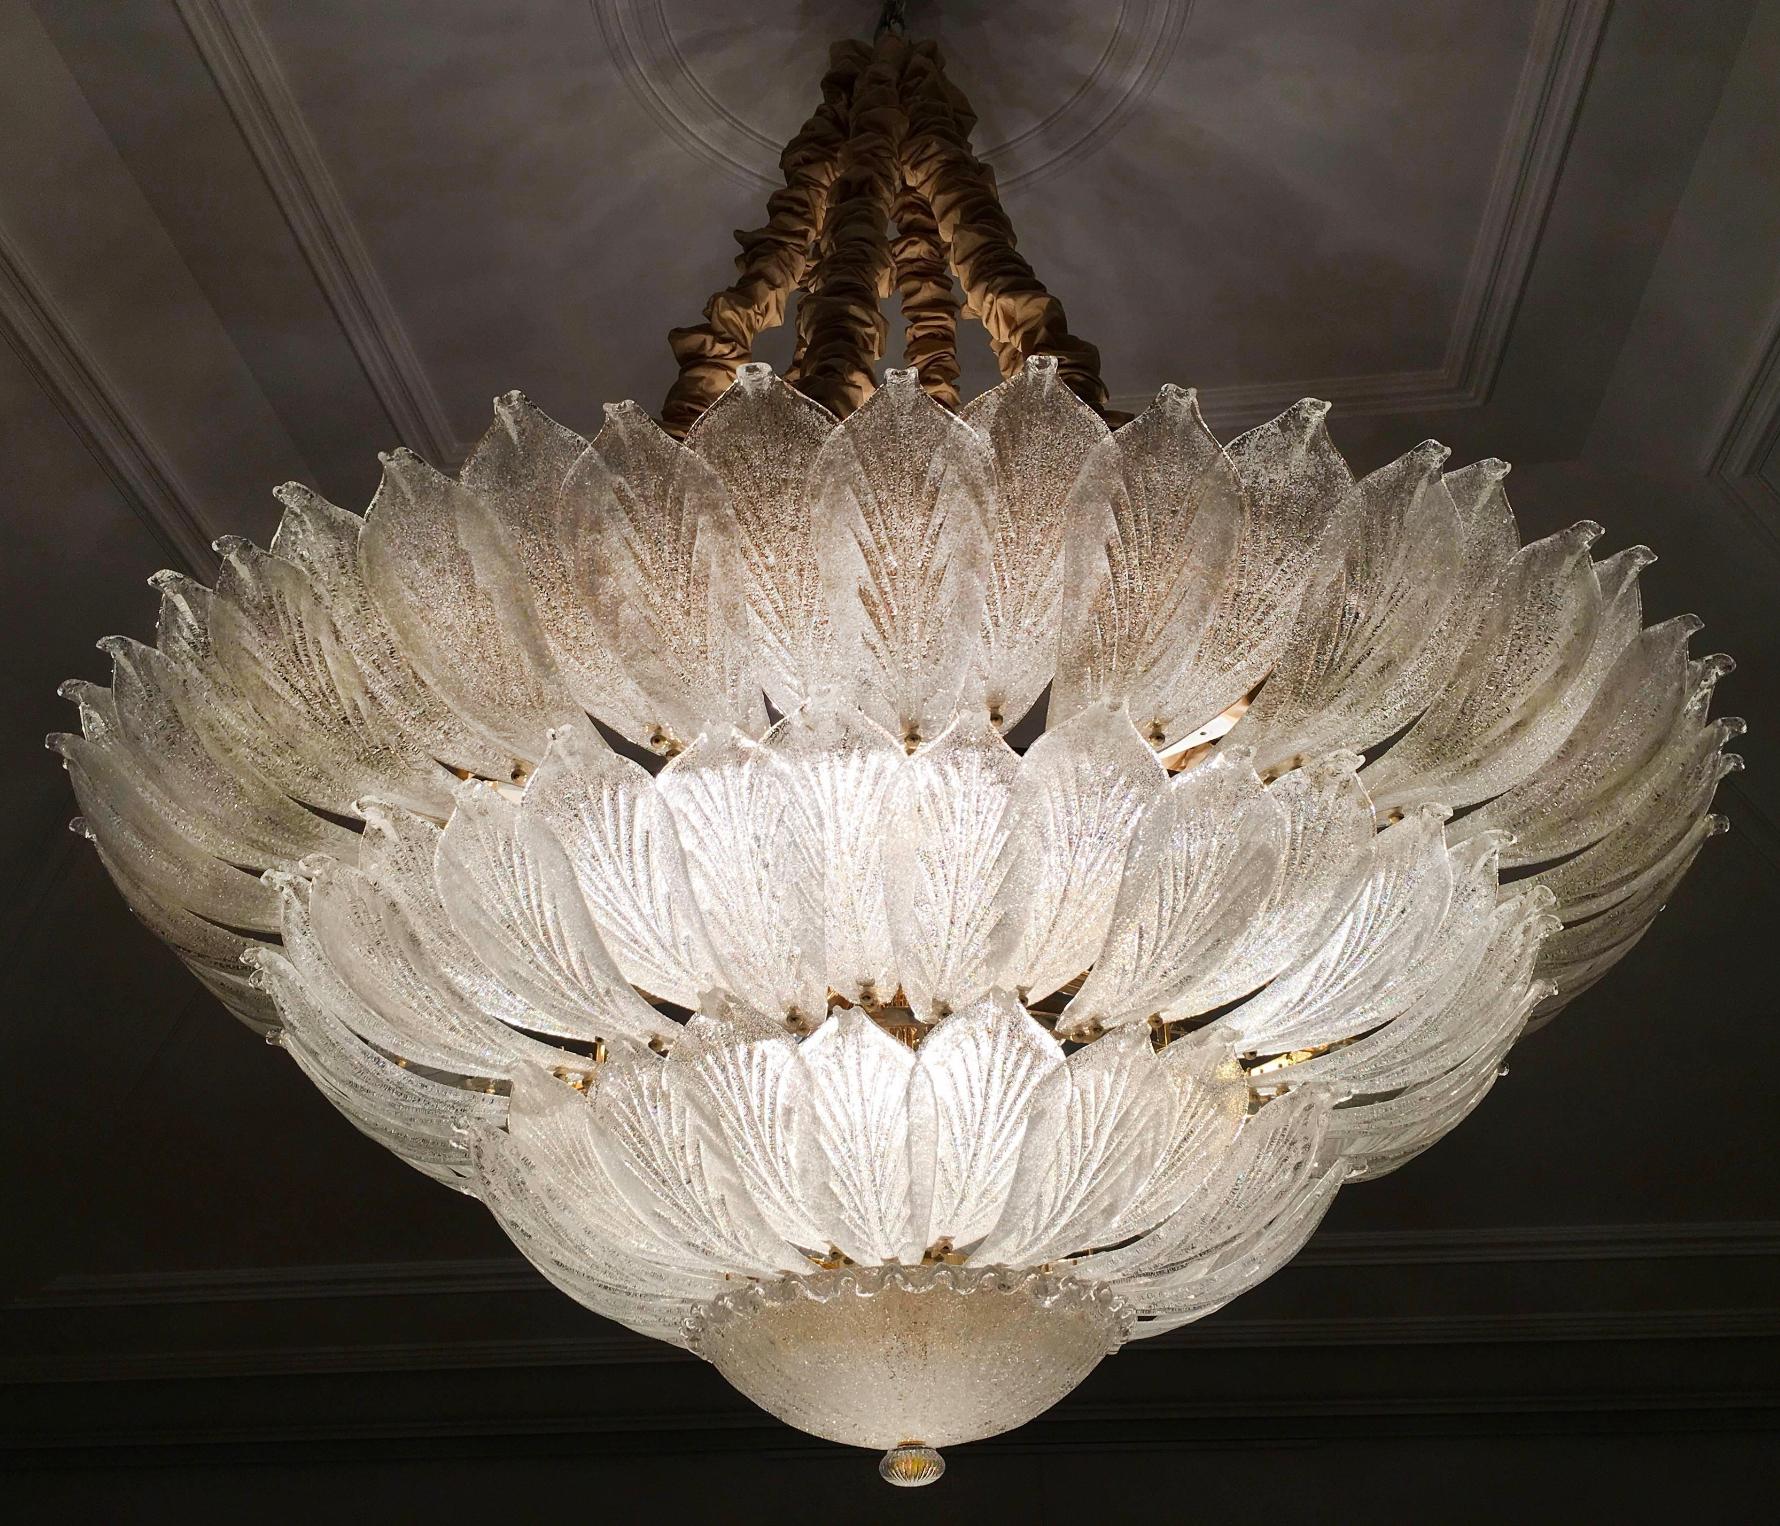 Realized in pure Murano glass consist of an incredible number of leaves. The structure is plated with gold 18 lights spread a magical light. Measures: Diameter 126 cm, height 65 cm and chain.